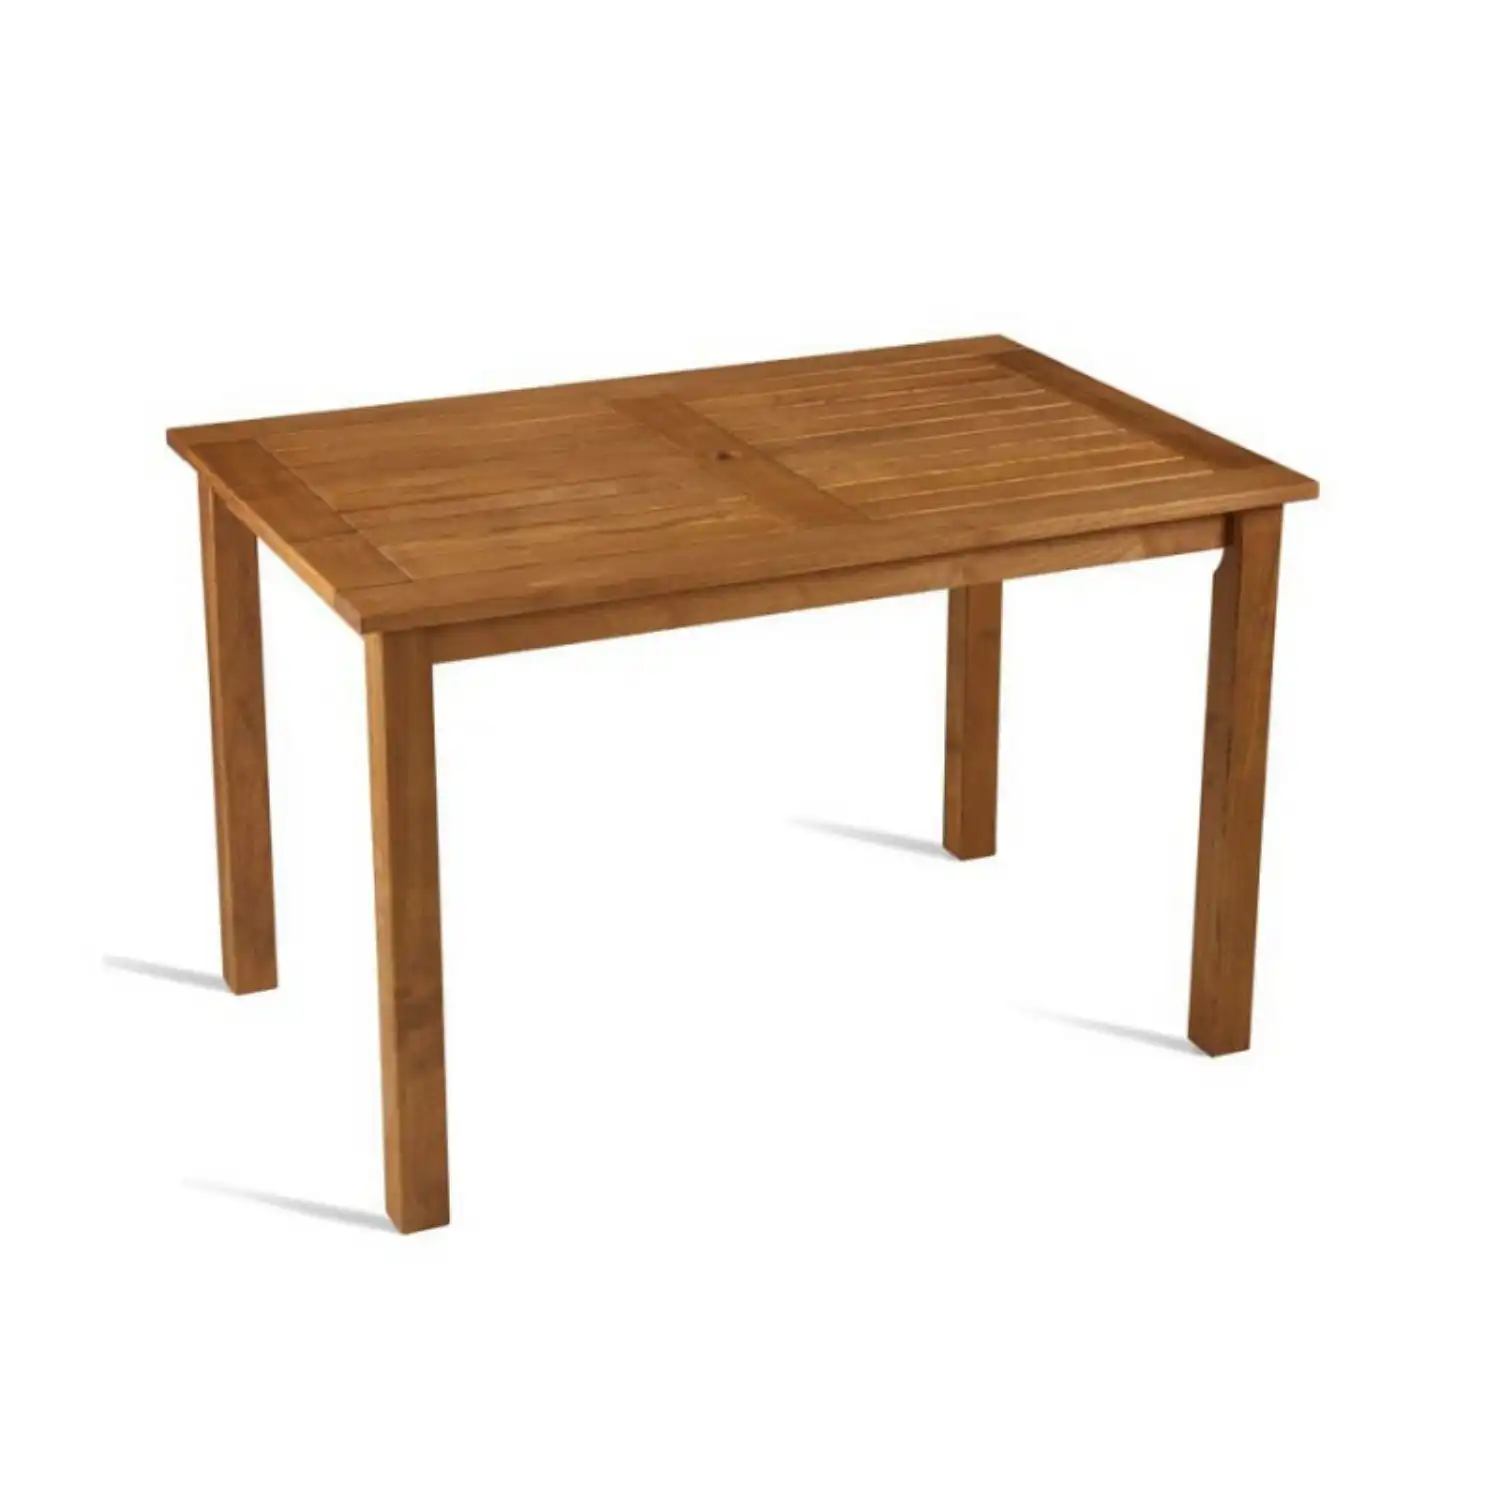 Robinia Wood 120cm Dining Table Outdoor